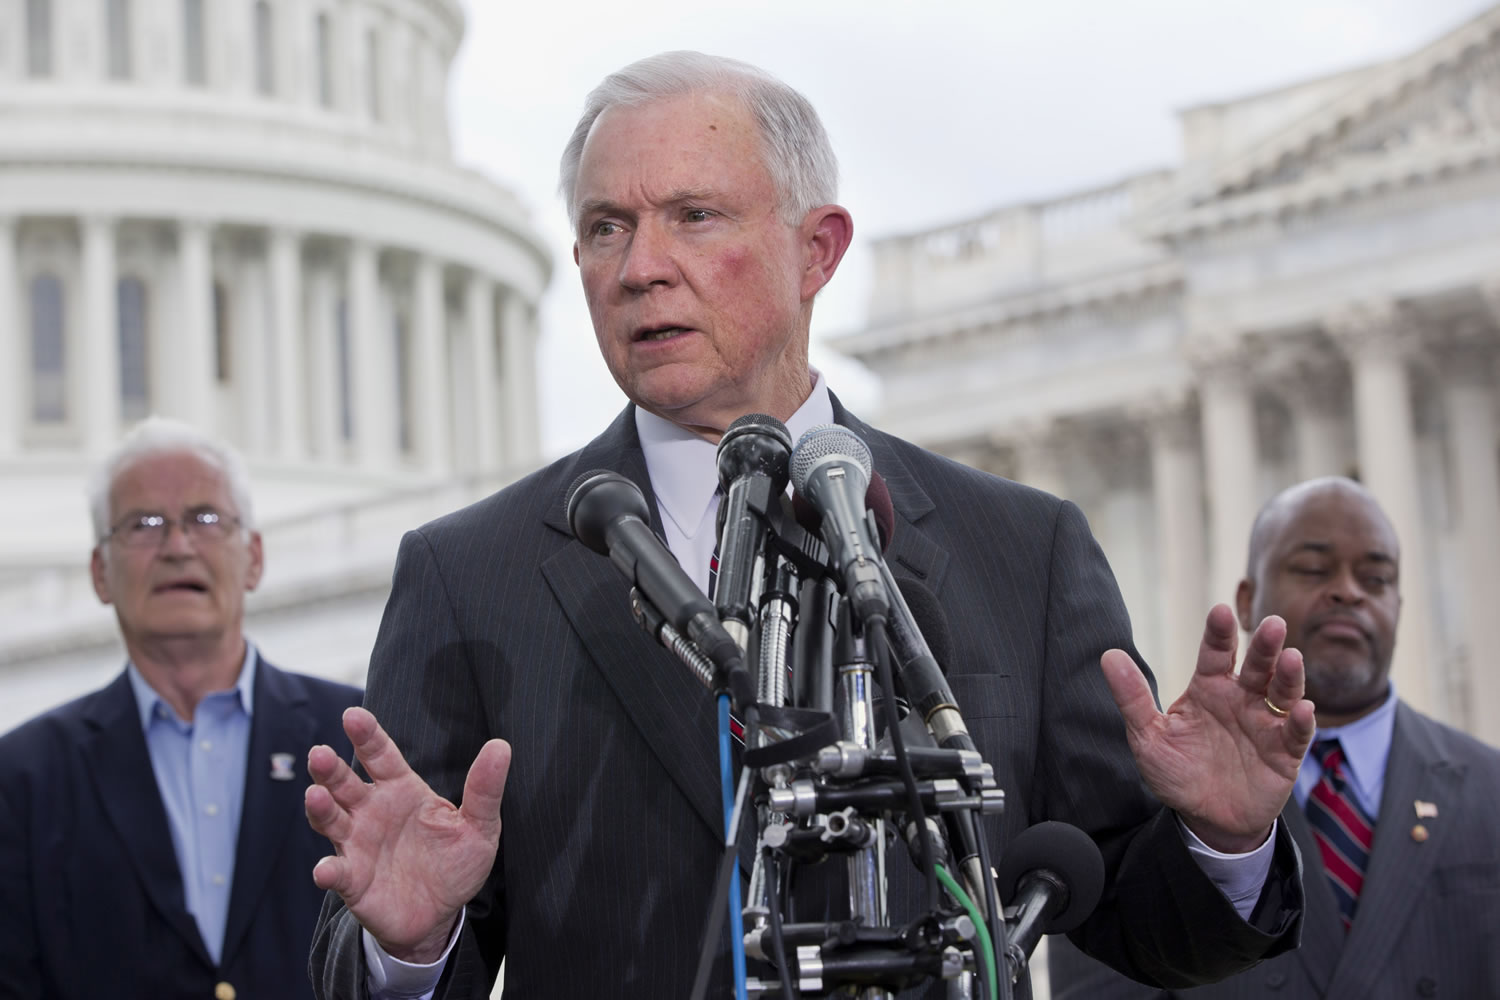 Sen. Jeff Sessions, R-Ala., center, speaks at a news conference hosted by the Tea Party Patriots to oppose the Senate immigration reform bill, Thursda on Capitol Hill in Washington. Behind him are Hans Marsen, left, an immigrant from England, and Niger Innis with TheTeaParty.Net.